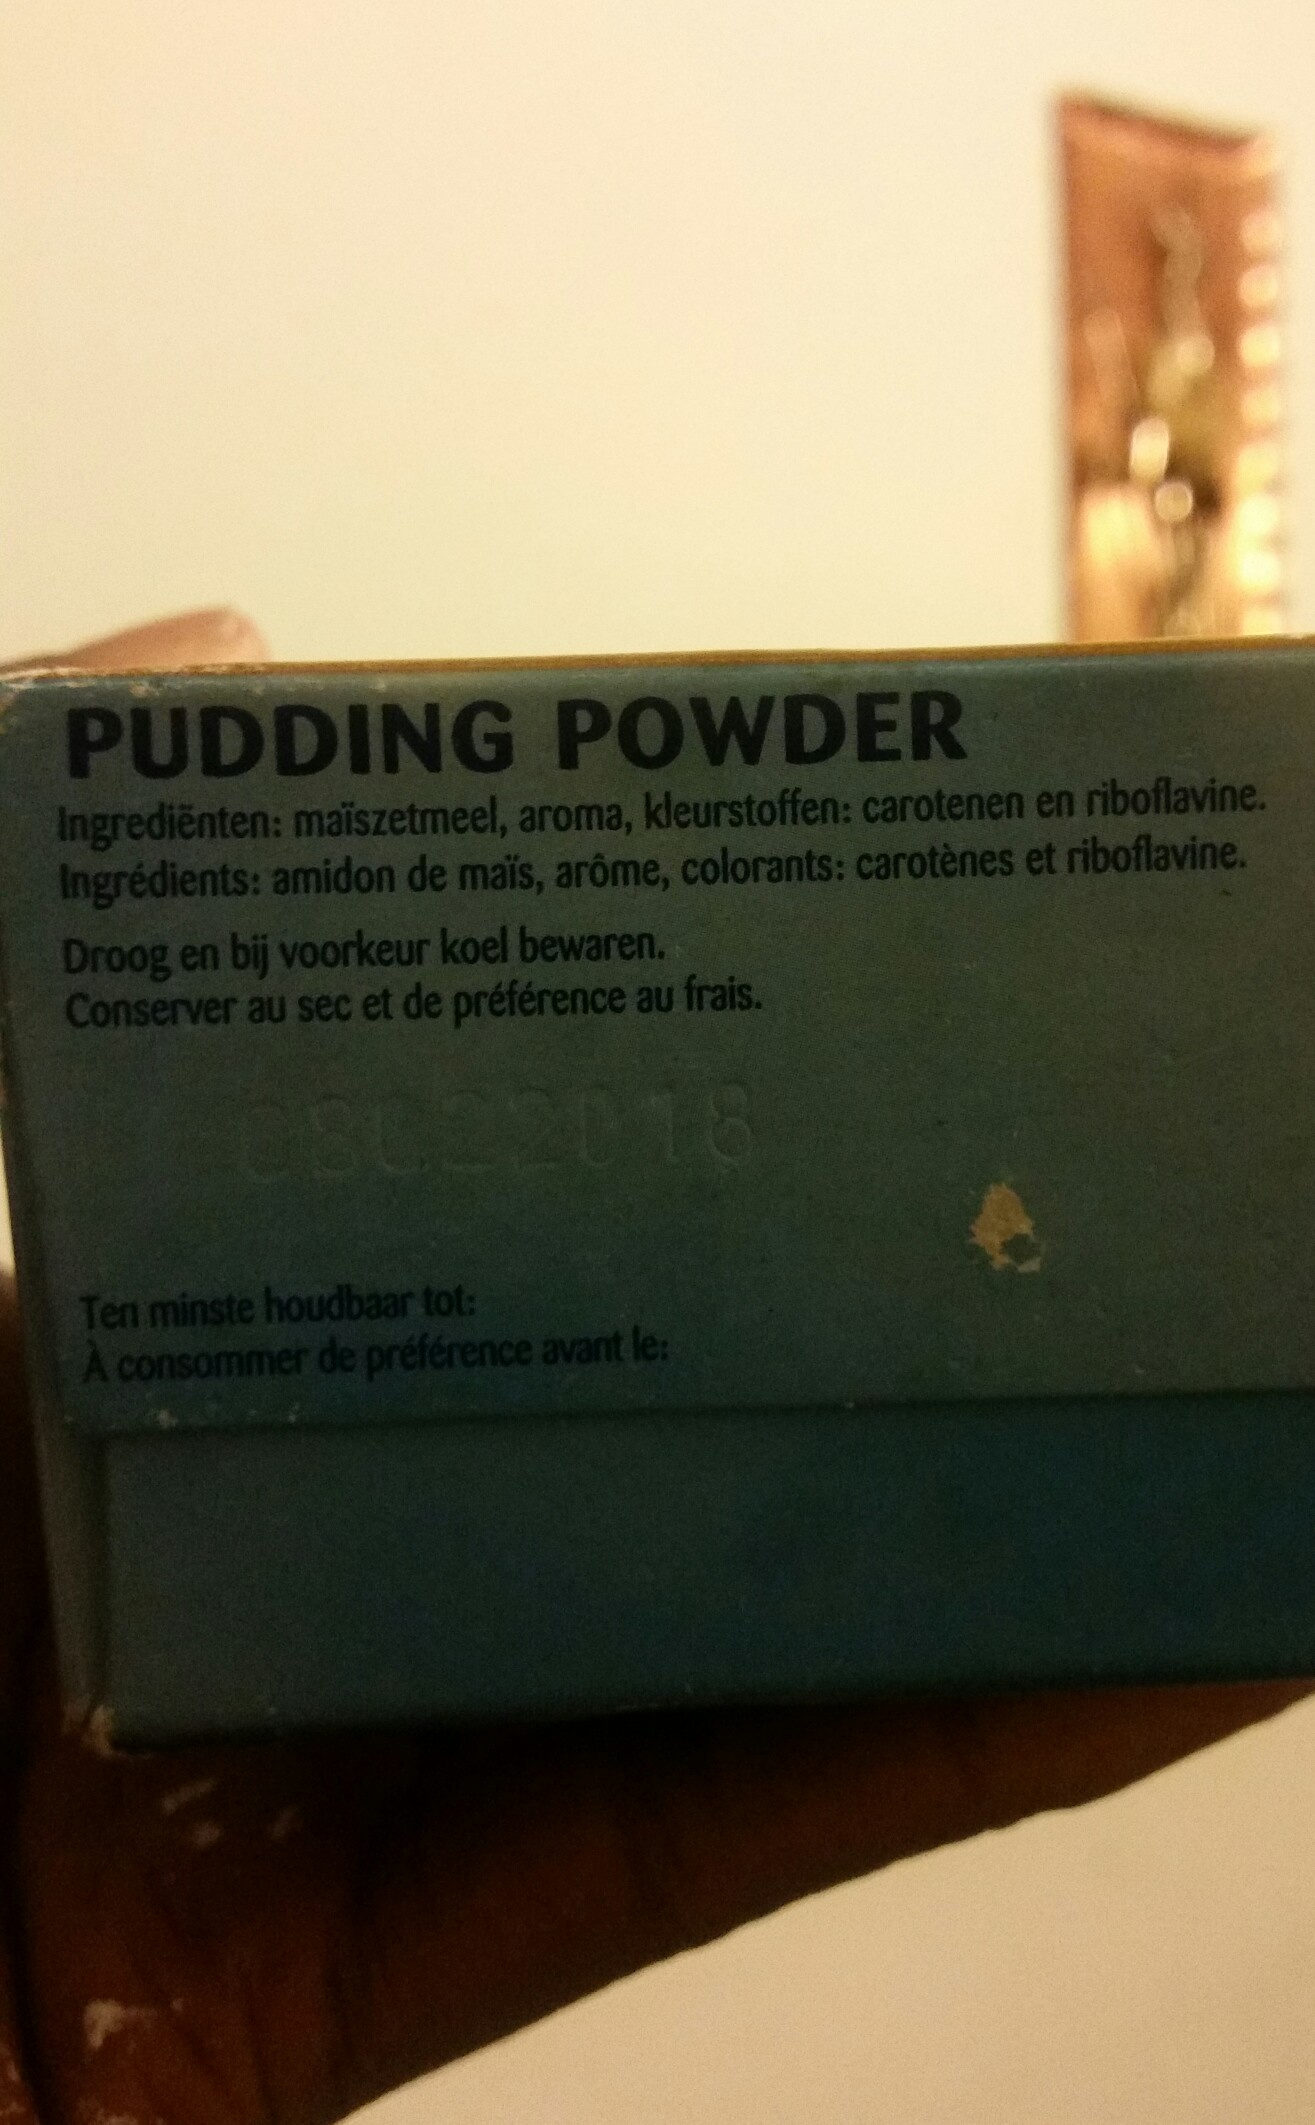 Impérial poudre pudding vanille - Ingredients - fr